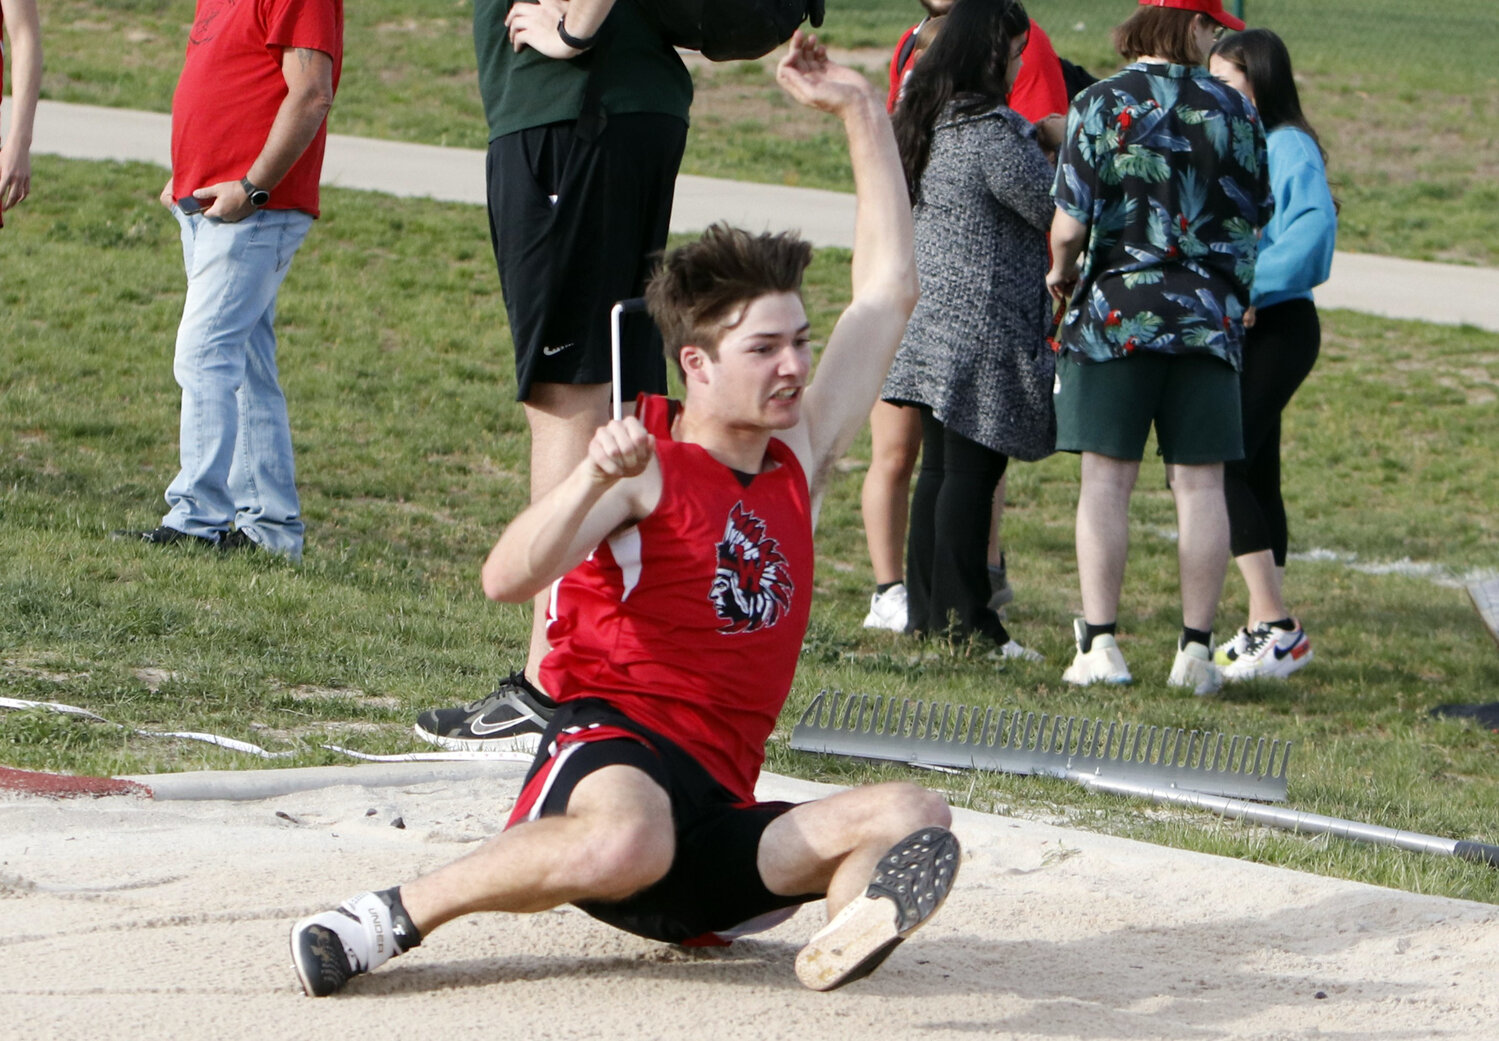 Warrenton senior Colton Brosenne lands in the sand pit during the triple jump competition at last week's GAC North Championships.